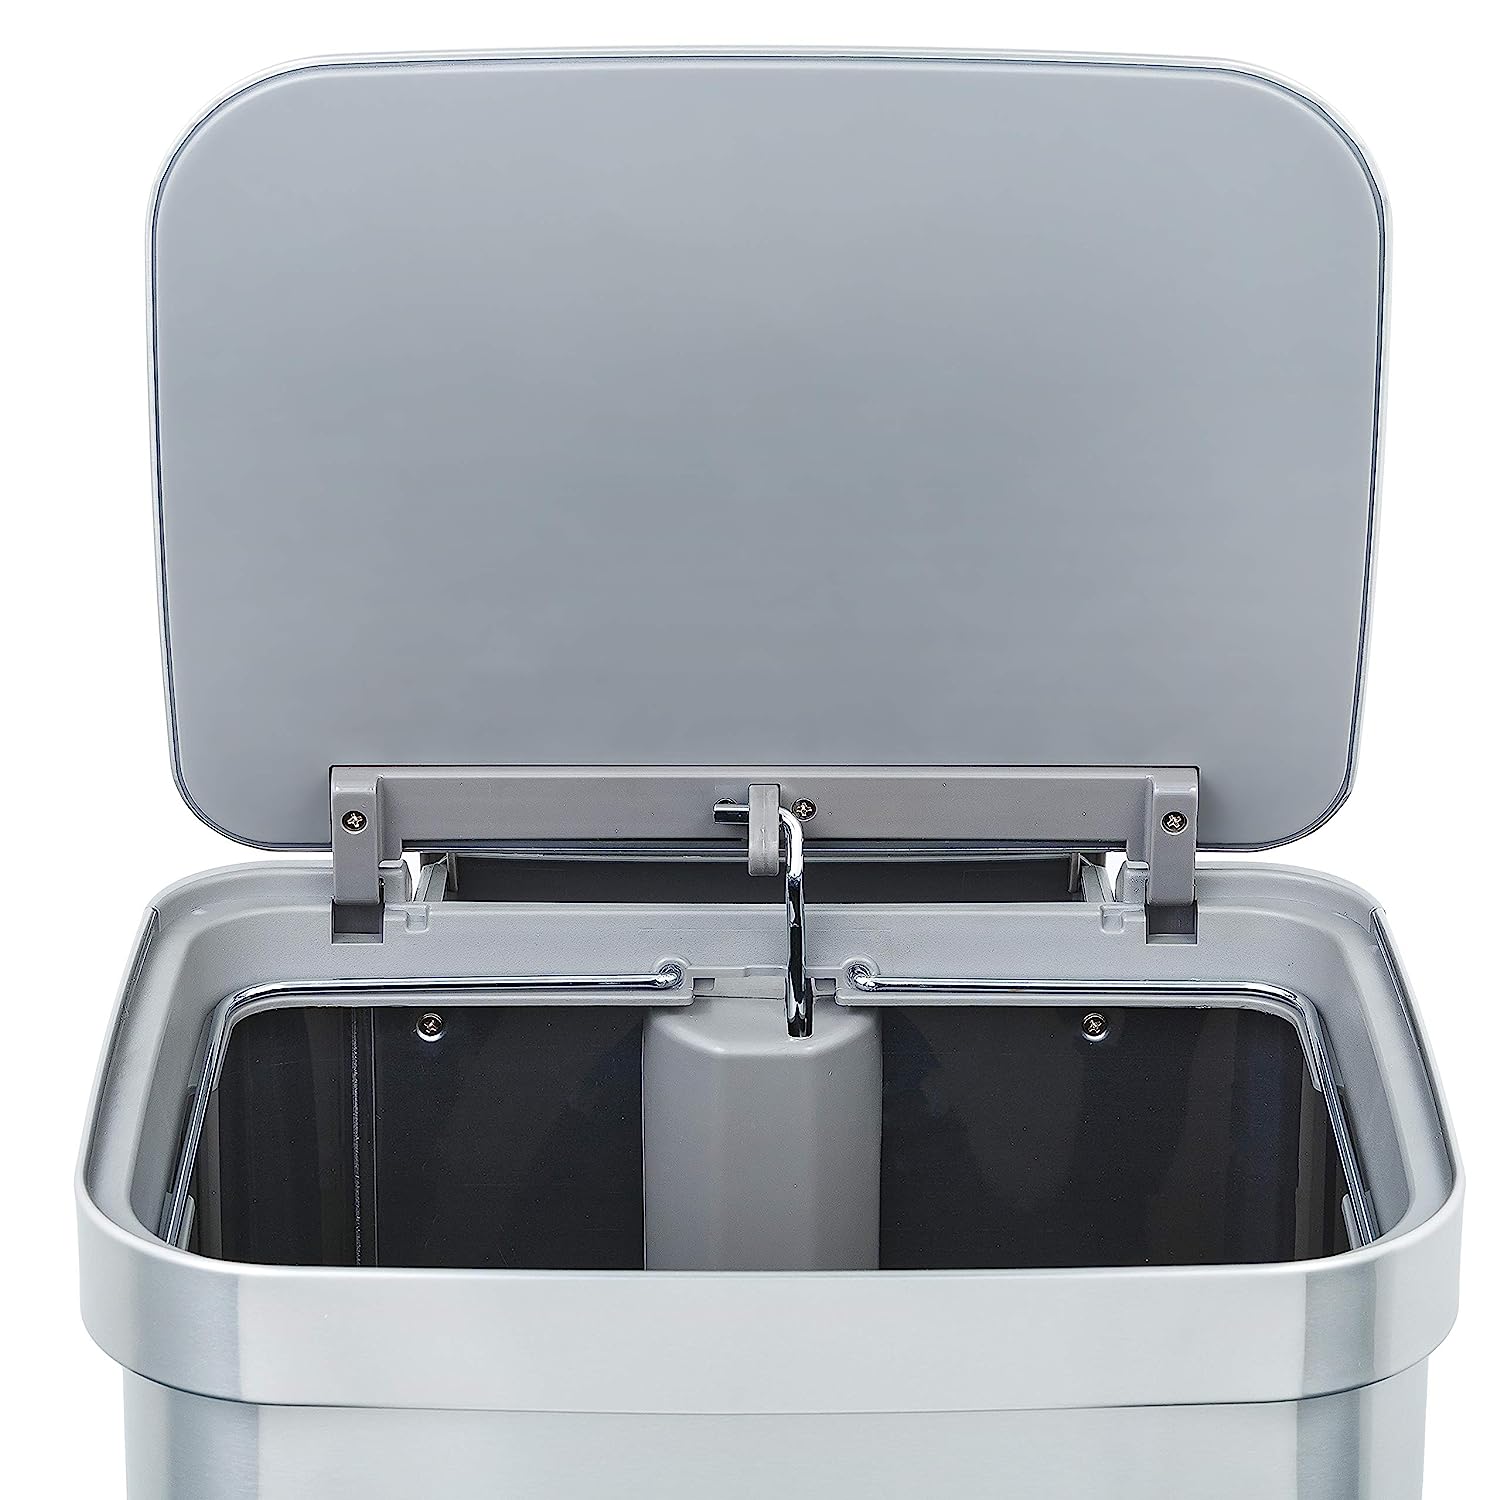 https://bigbigmart.com/wp-content/uploads/2023/07/Glad-Stainless-Steel-Step-Trash-Can-with-Clorox-Odor-Protection-Large-Metal-Kitchen-Garbage-Bin-with-Soft-Close-Lid-Foot-Pedal-and-Waste-Bag-Roll-Holder-20-Gallon-All-Stainless7.jpg